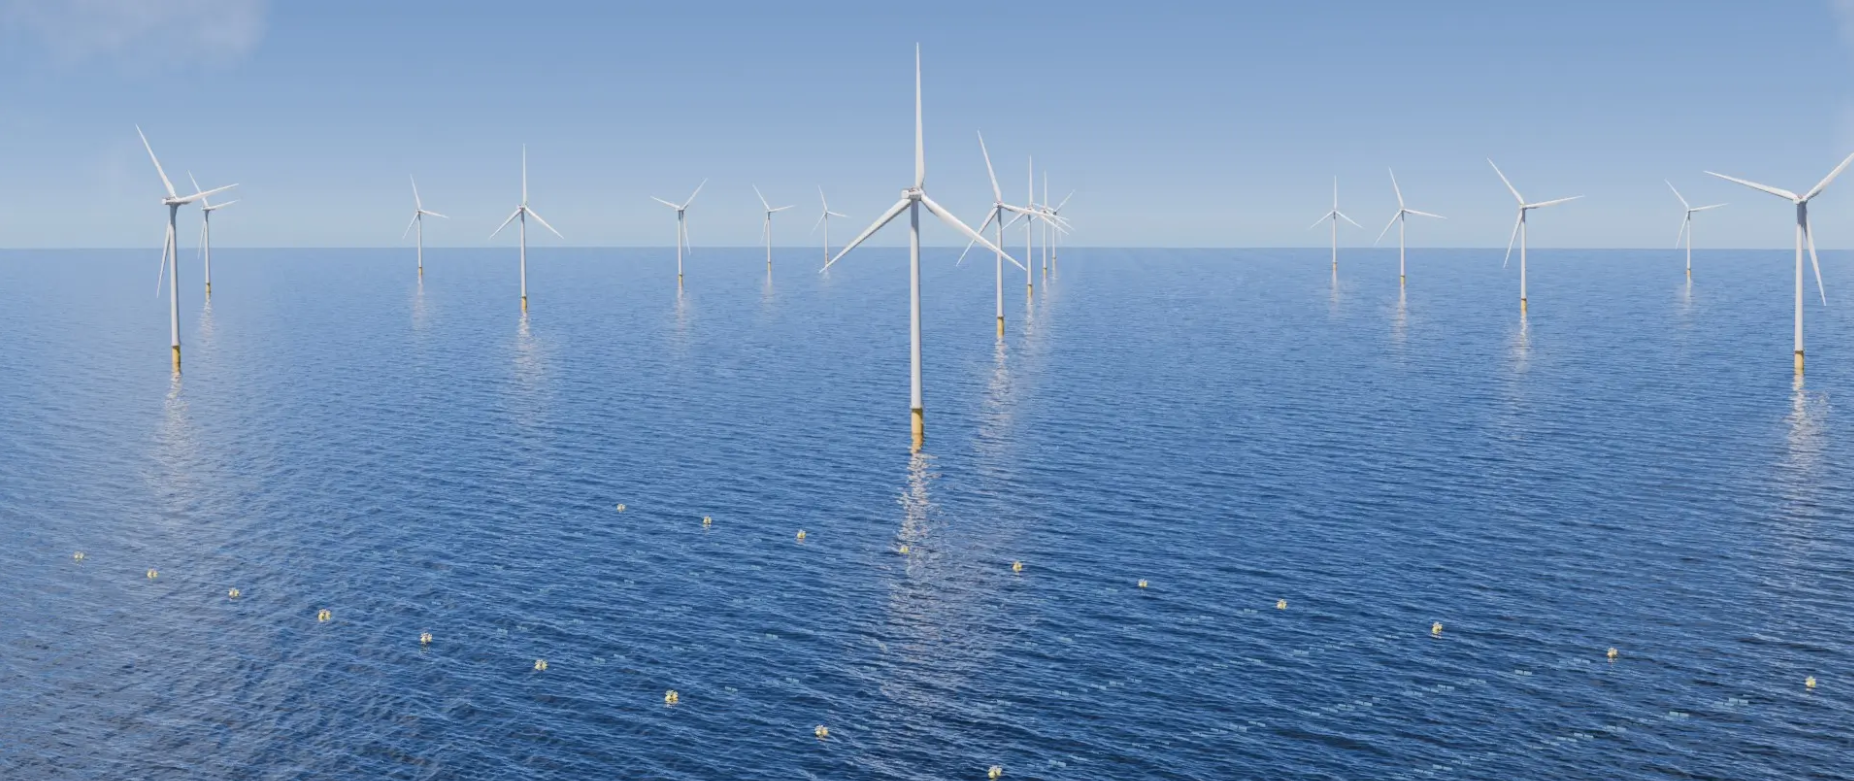 Wavepiston and its compatriot Ørsted have established a partnership to examine the potential for co-location of wave energy and offshore wind in Denmark.